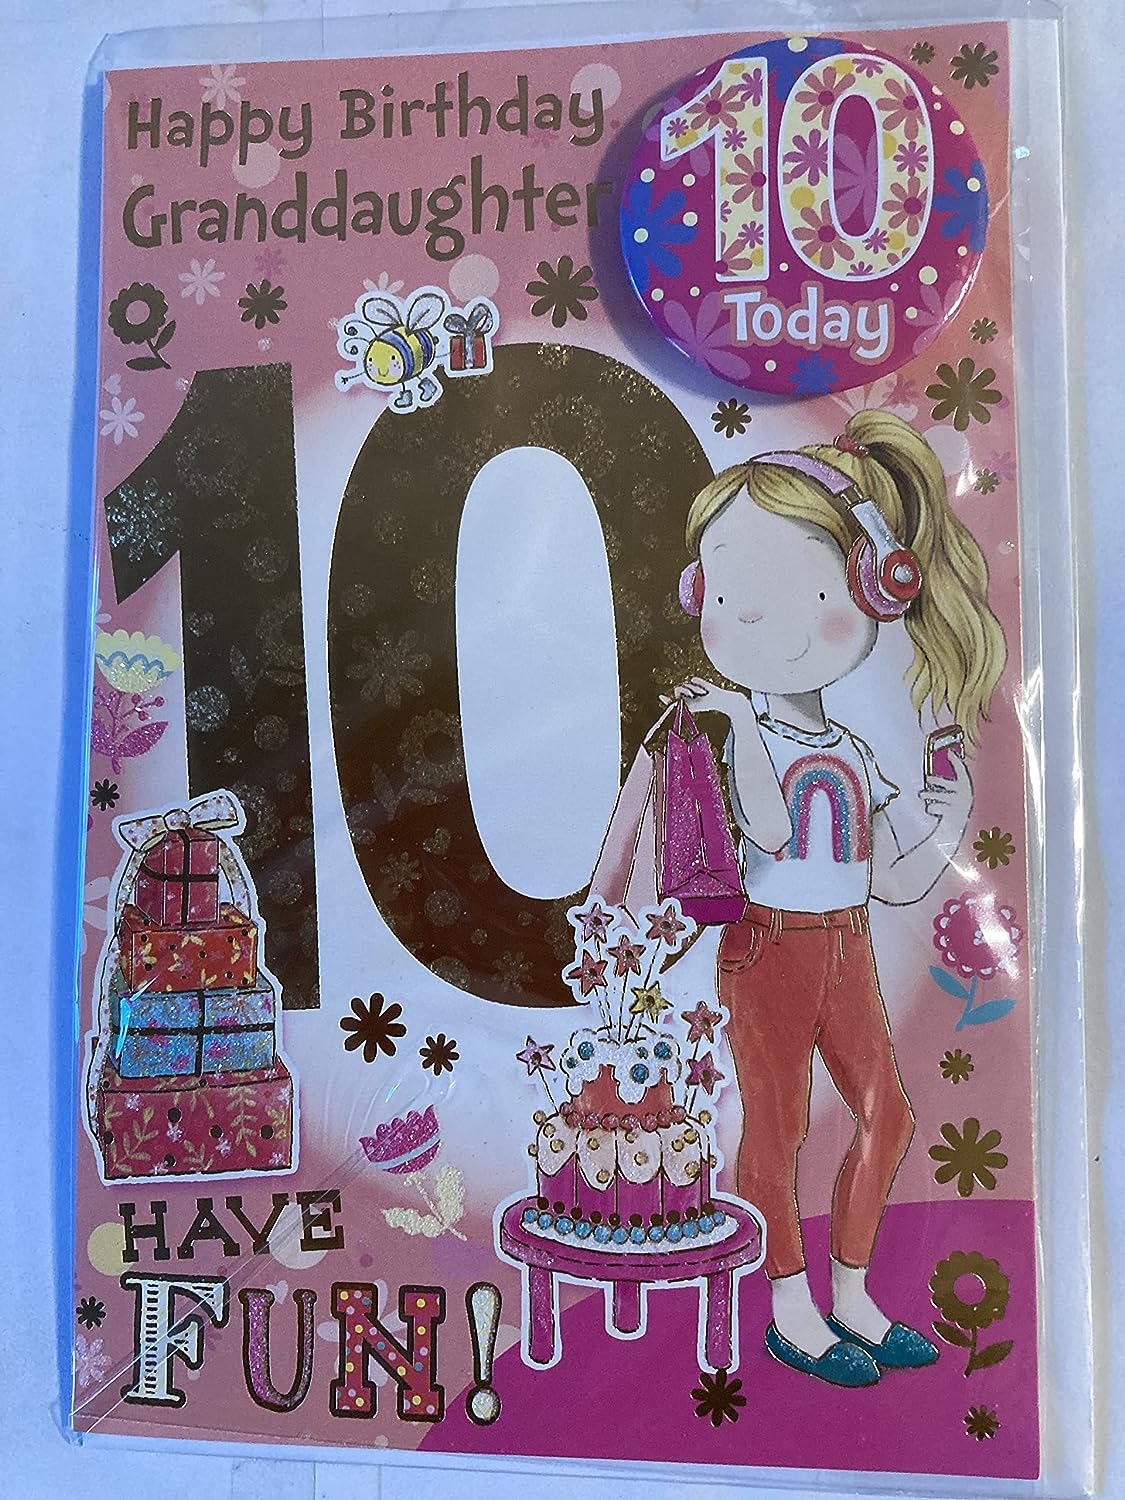 Xpress Yourself Happy Birthday Granddaughter 10 Today! Birthday Card RRP 3.99 CLEARANCE XL 2.99